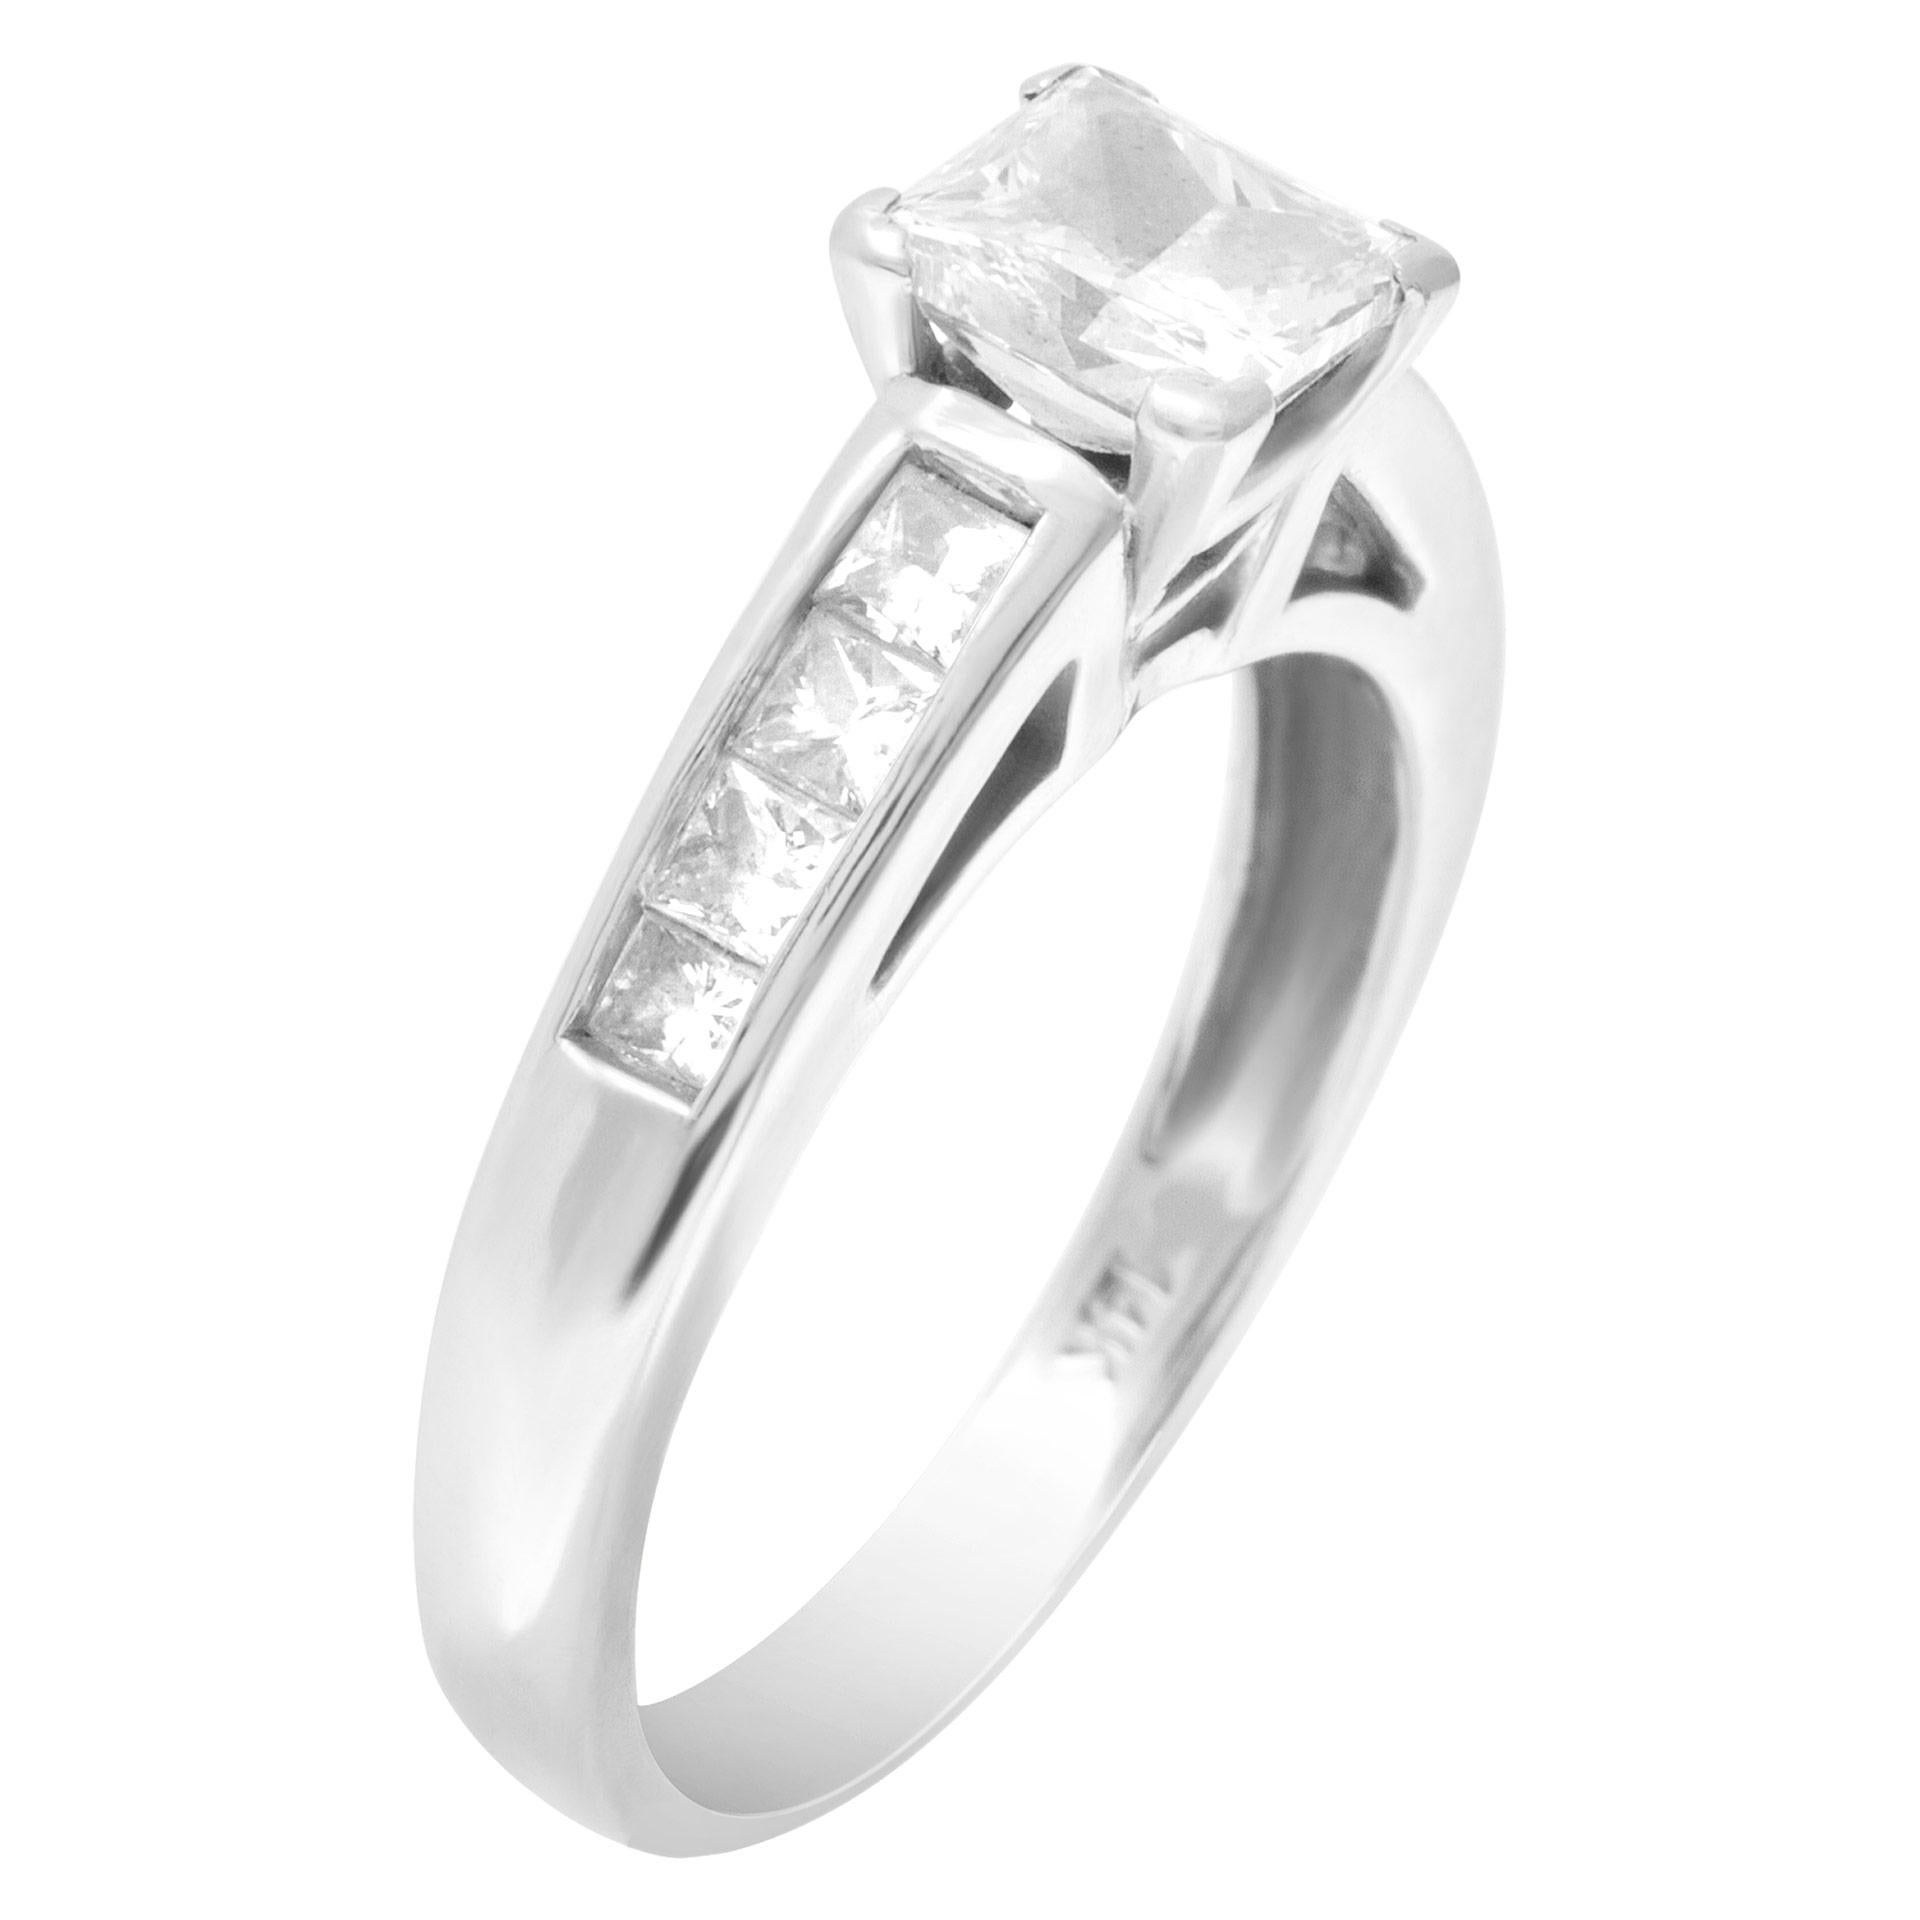 GIA certified rectangular modified brilliant cut diamond 1.01 carat (F color, SI1 clarity) ring set in 14k white gold with approx. 0.60 carat of side princess cut diamonds. Size 6.5.This GIA certified ring is currently size 6.5 and some items can be